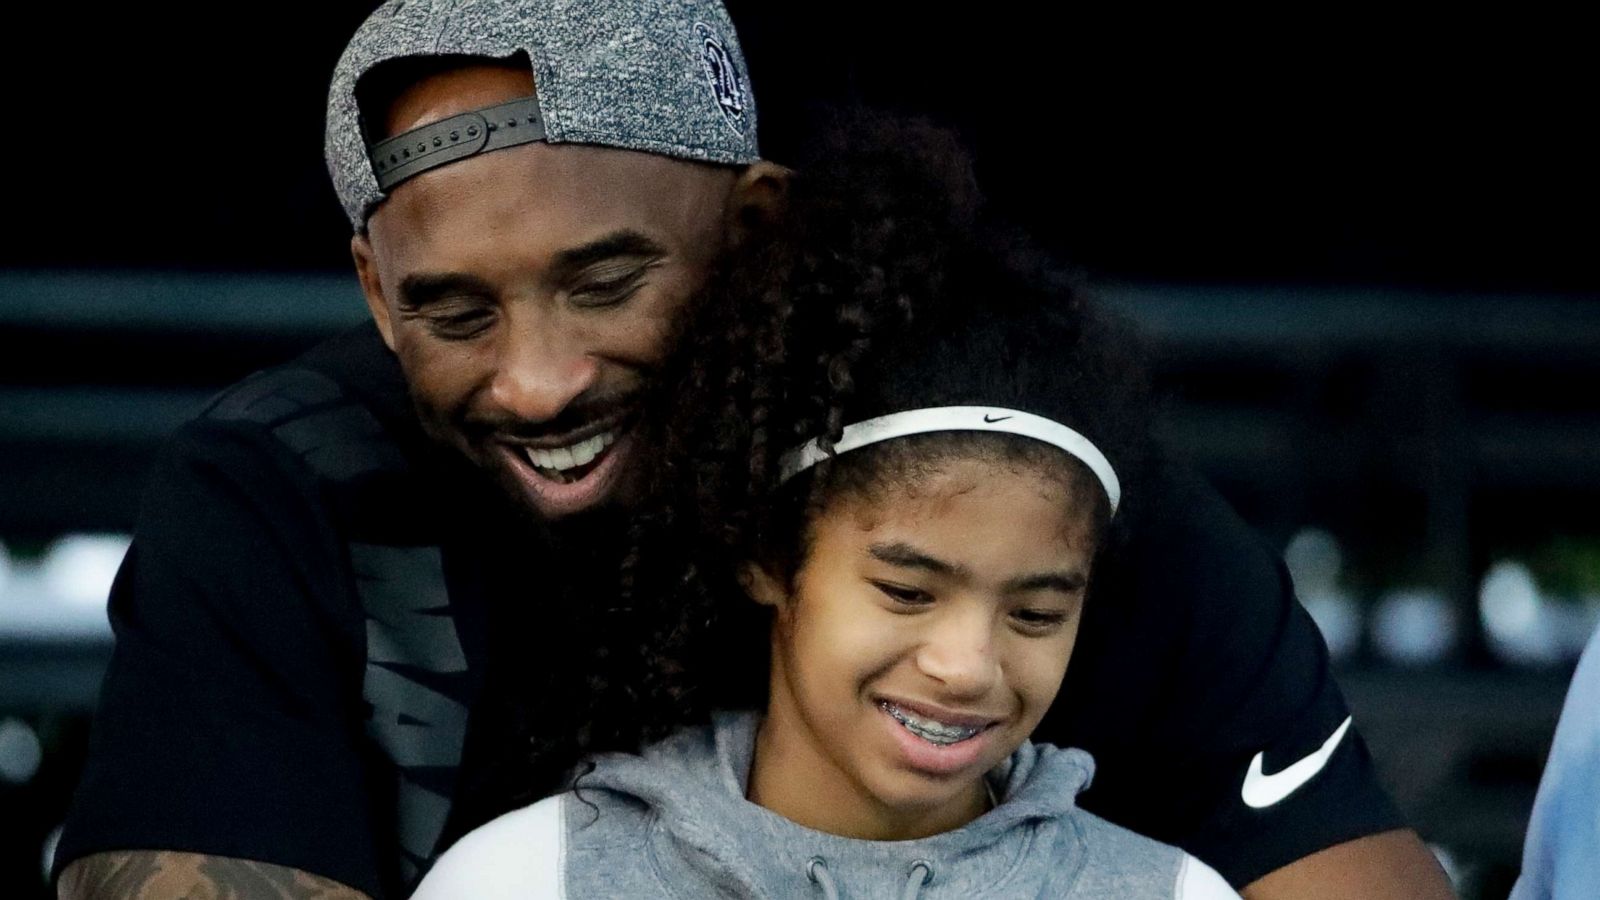 Gianna (Gigi) Bryant: The 13-year-old loved basketball as much as her dad -  National